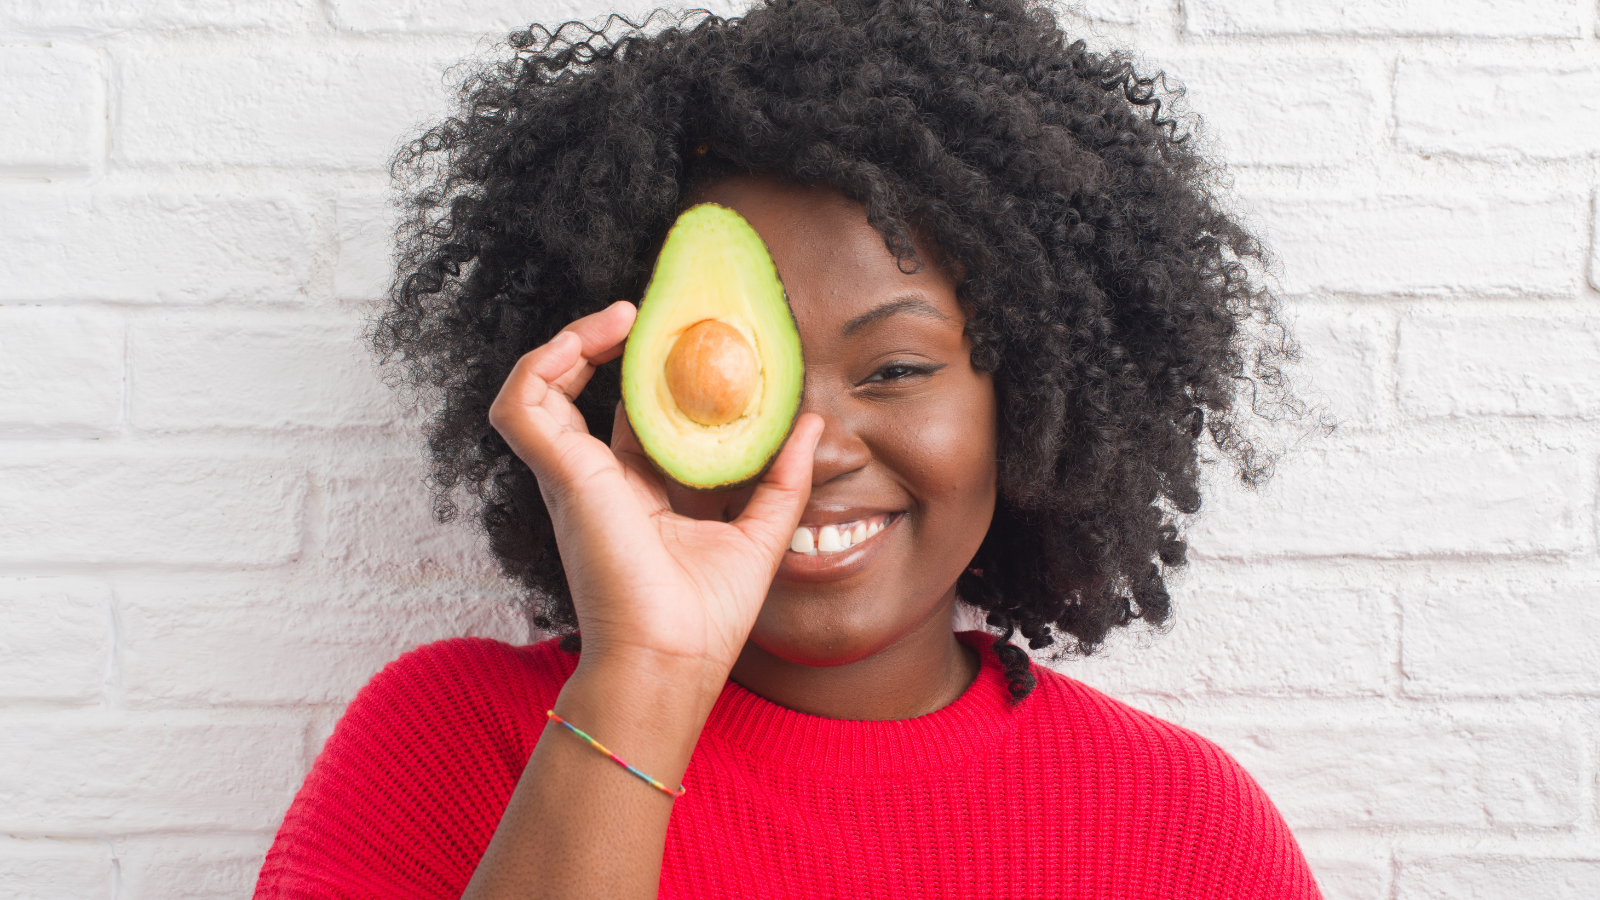 Young woman by white brick wall eating high-fiber diet like avocado with a happy face standing and smiling with a confident smile